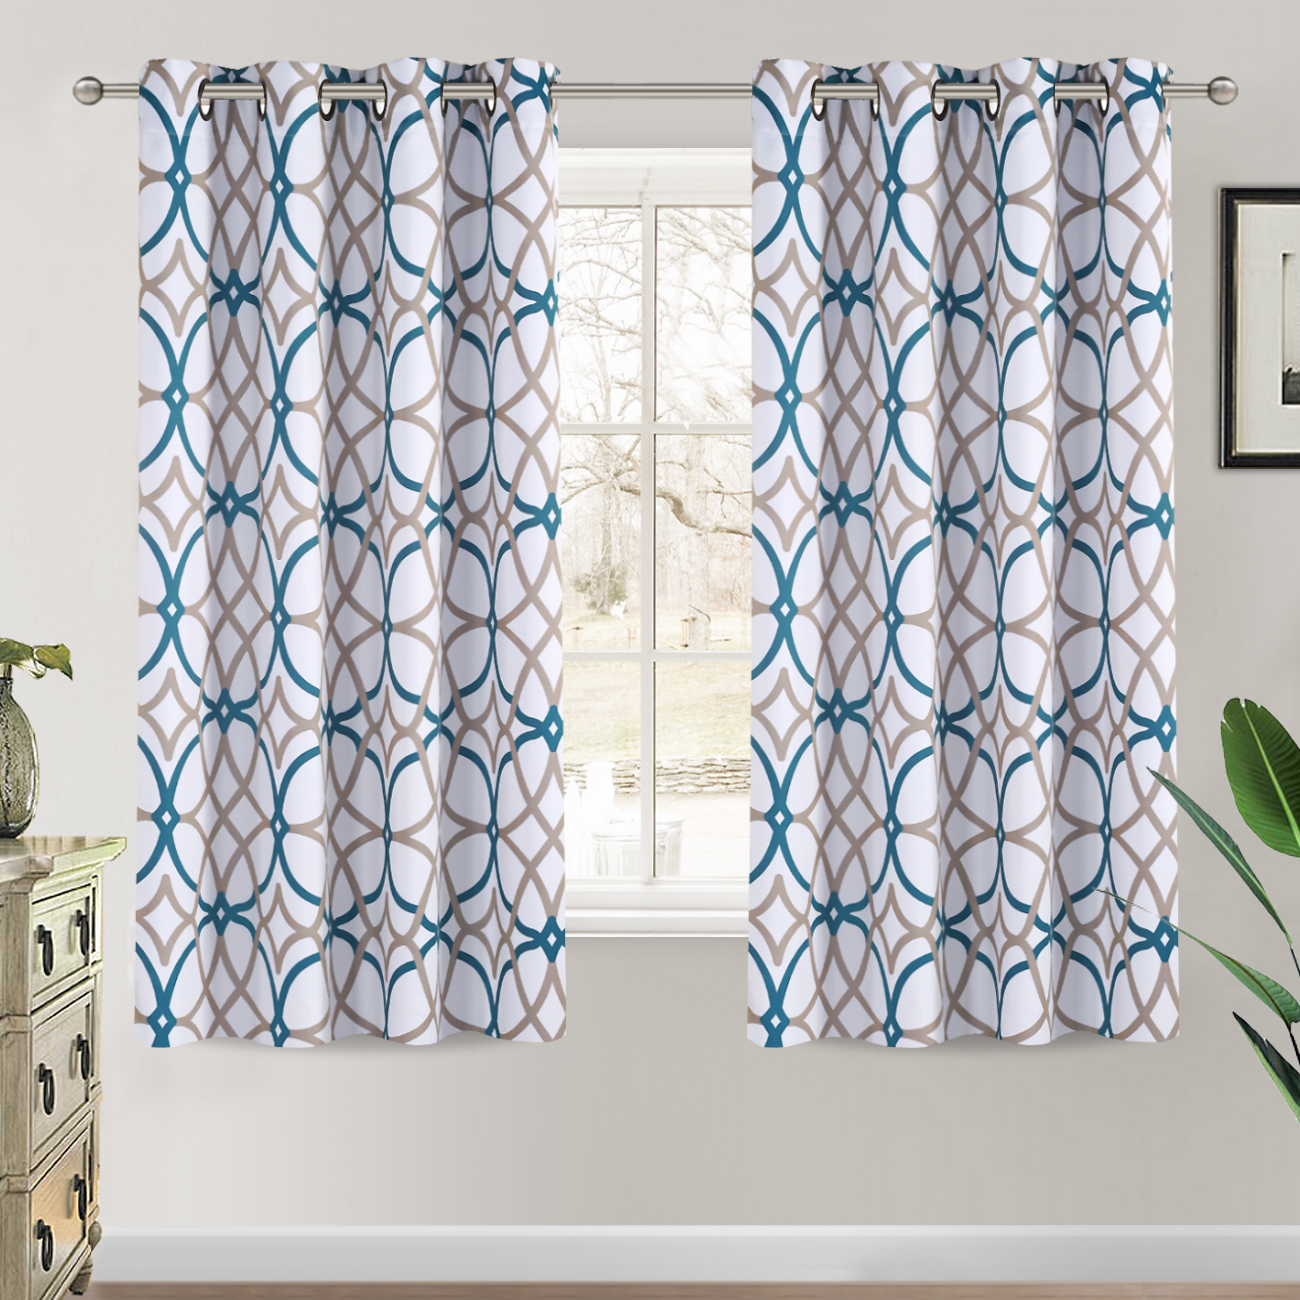 PrimeBeau Thermal Insulated Room Darkening Curtains for Living Room  Blackout Window Treatment Grommet Panels for Bedroom/Dining Room, Teal and  Taupe Geo Pattern Panels 52 by 63 inch Each Panel